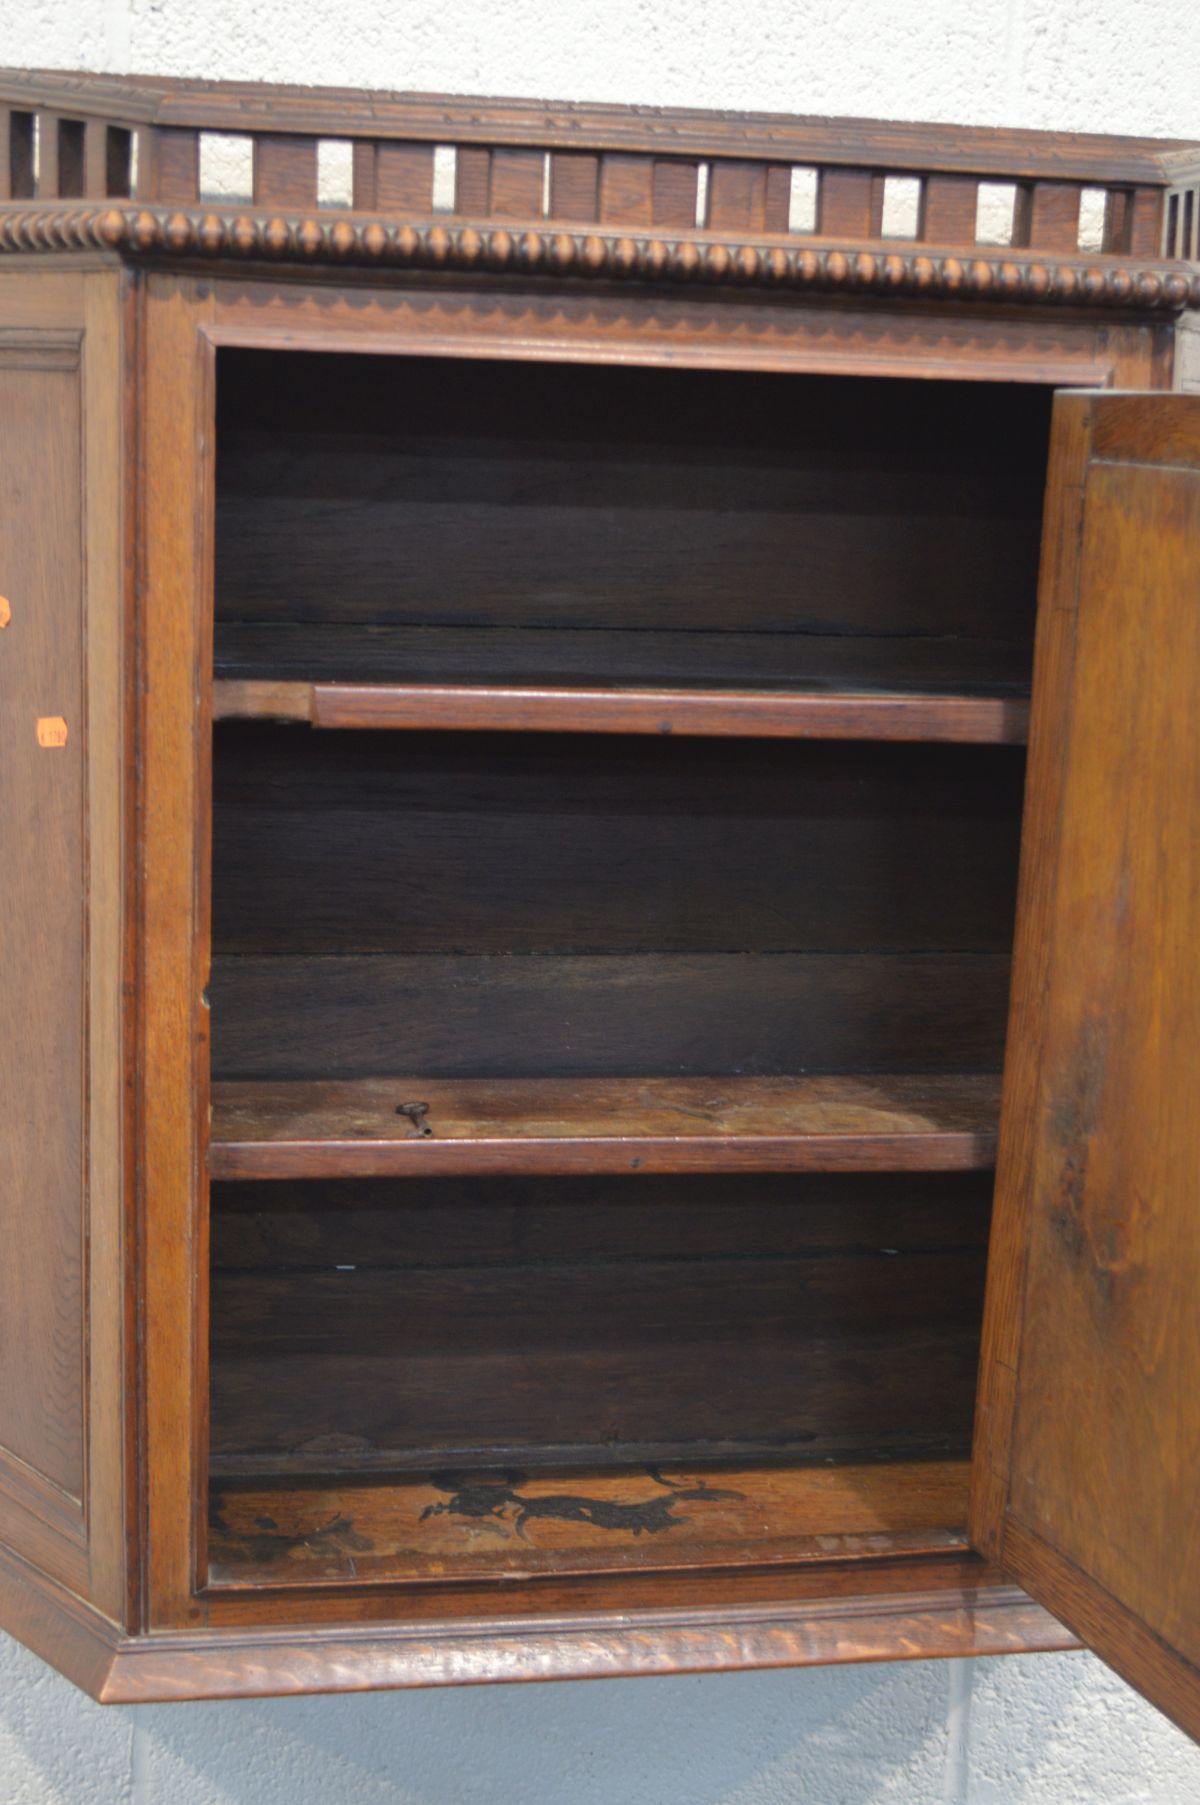 A LATE 19TH/EARLY 20TH CENTURY OAK CANTED SINGLE DOOR HANGING WALL CABINET with beading and - Image 3 of 3